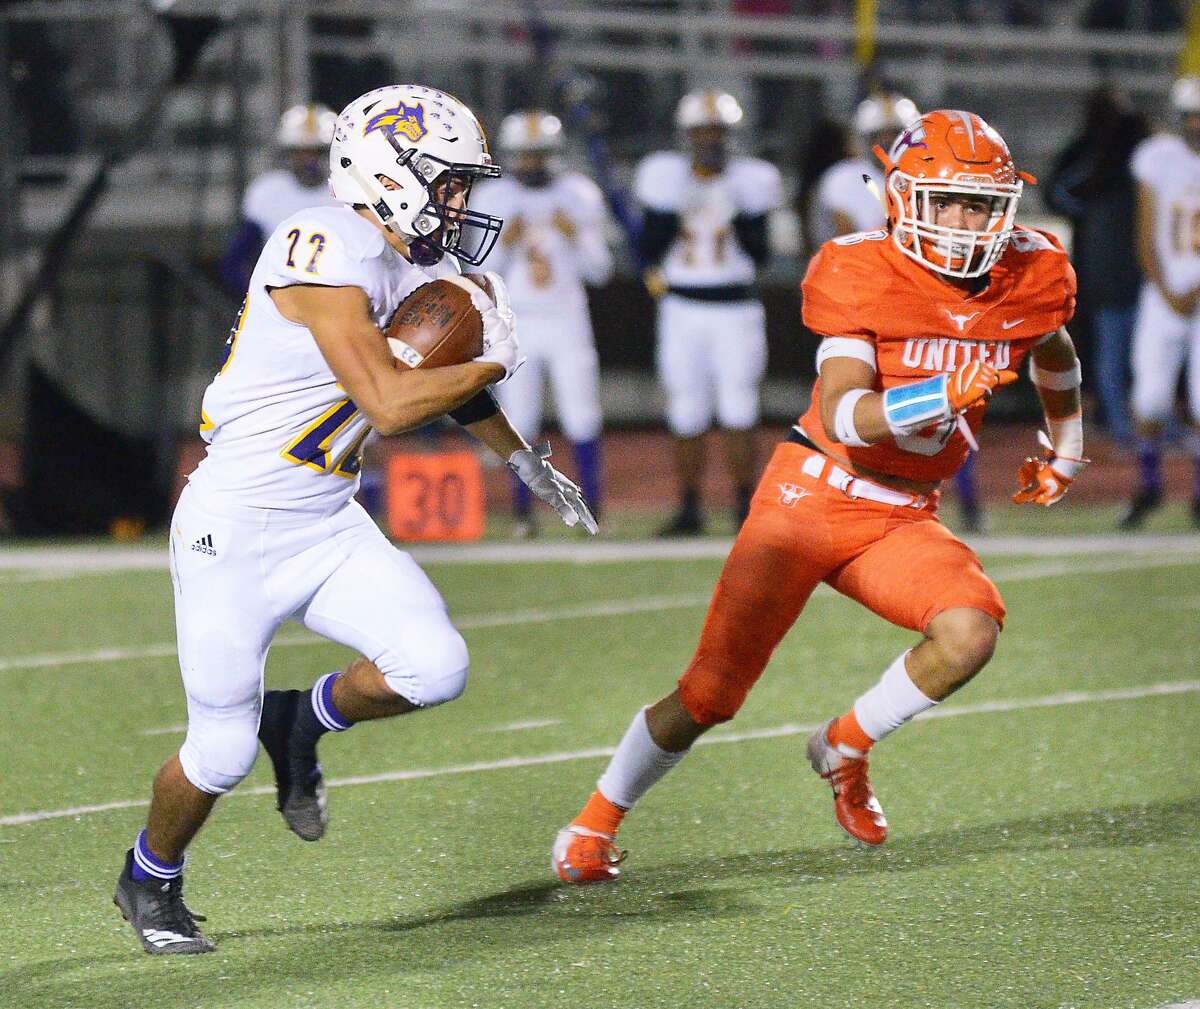 LBJ’s Eddie Santillan was held to 20 yards in the second half after racking up 173 yards on 10 carries in the first half Friday in a 48-20 loss to United at the SAC.